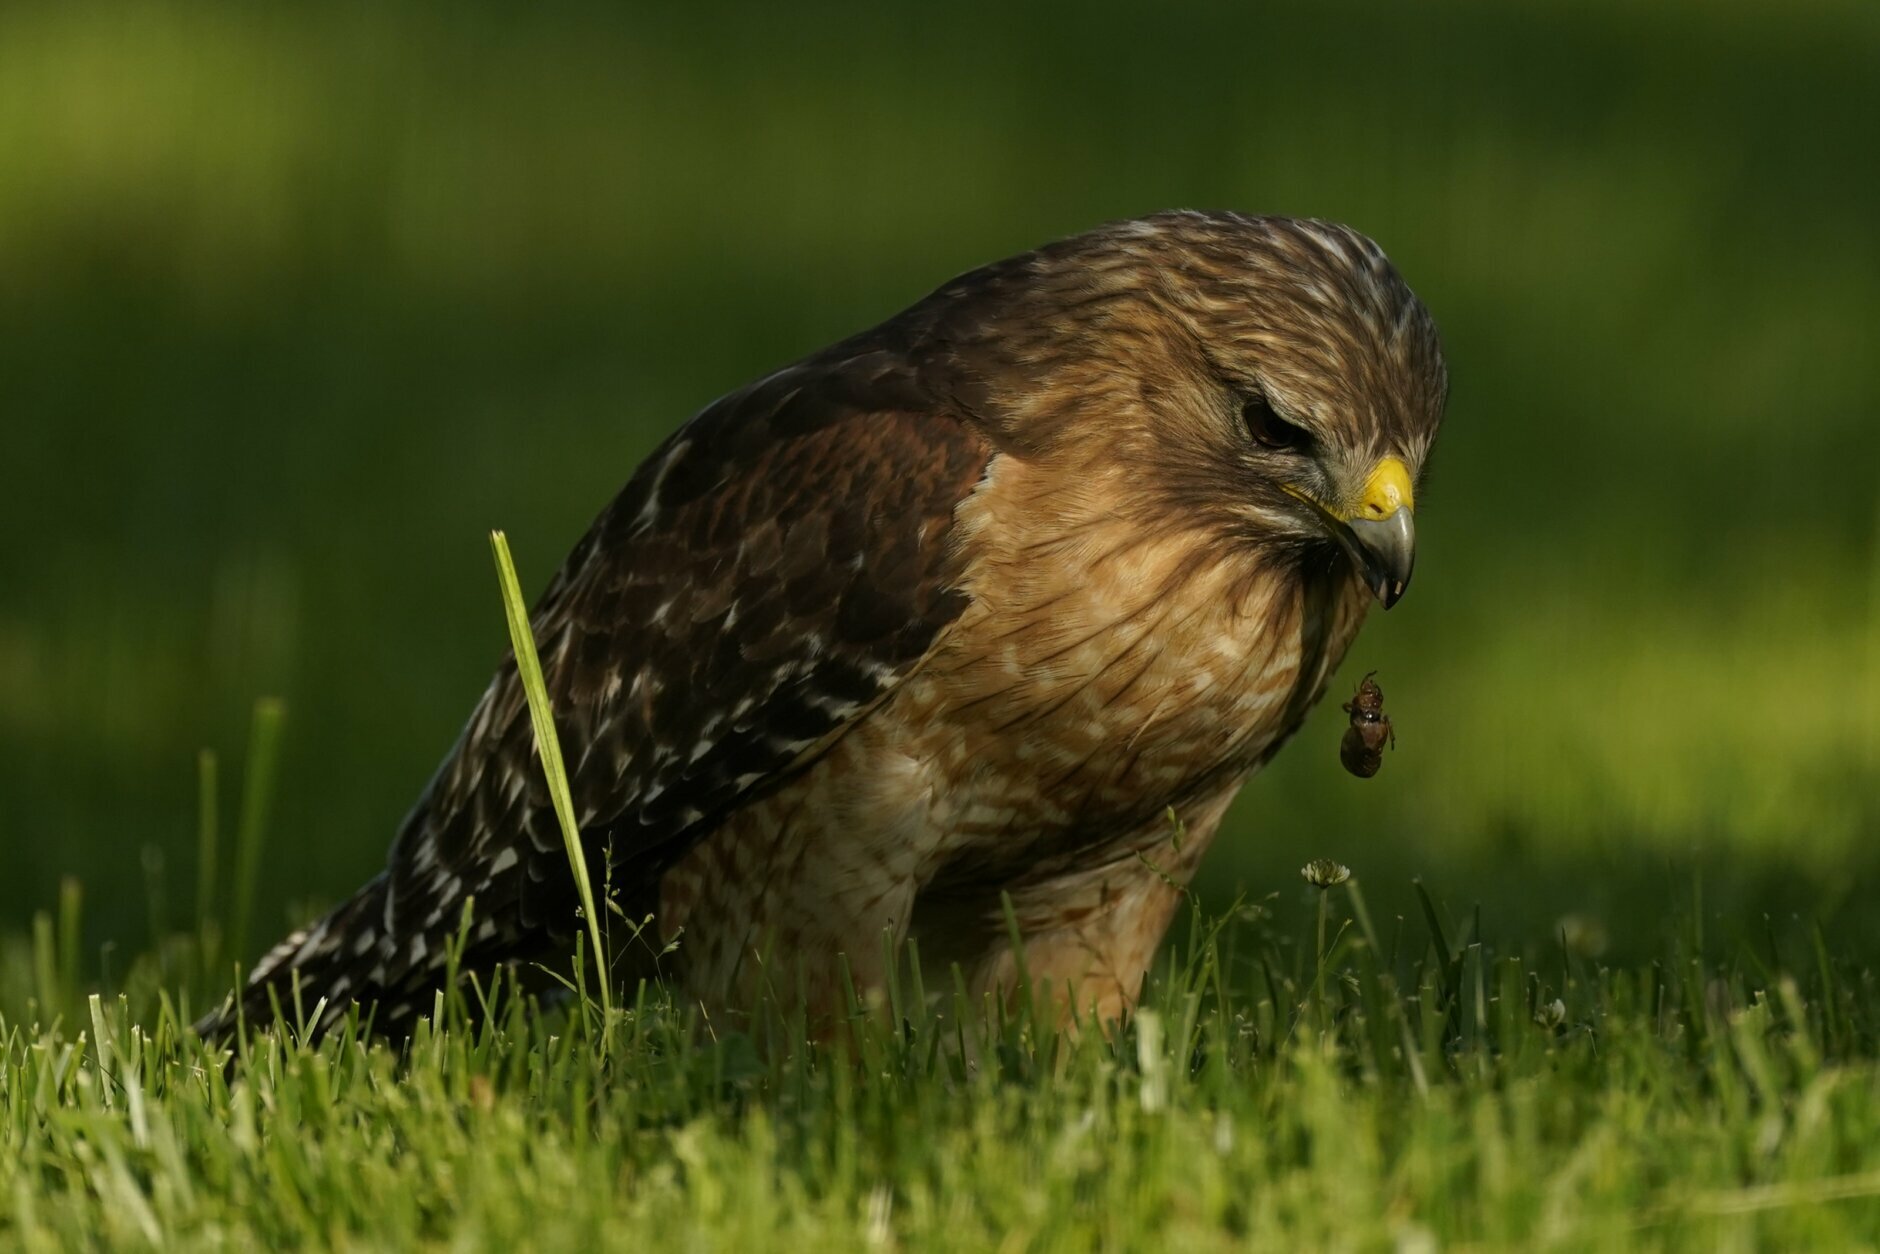 A red-shouldered hawk drops a squirming cicada nymph as it feeds in a lawn, Monday, May 17, 2021, in Columbia, Md. (AP Photo/Carolyn Kaster)